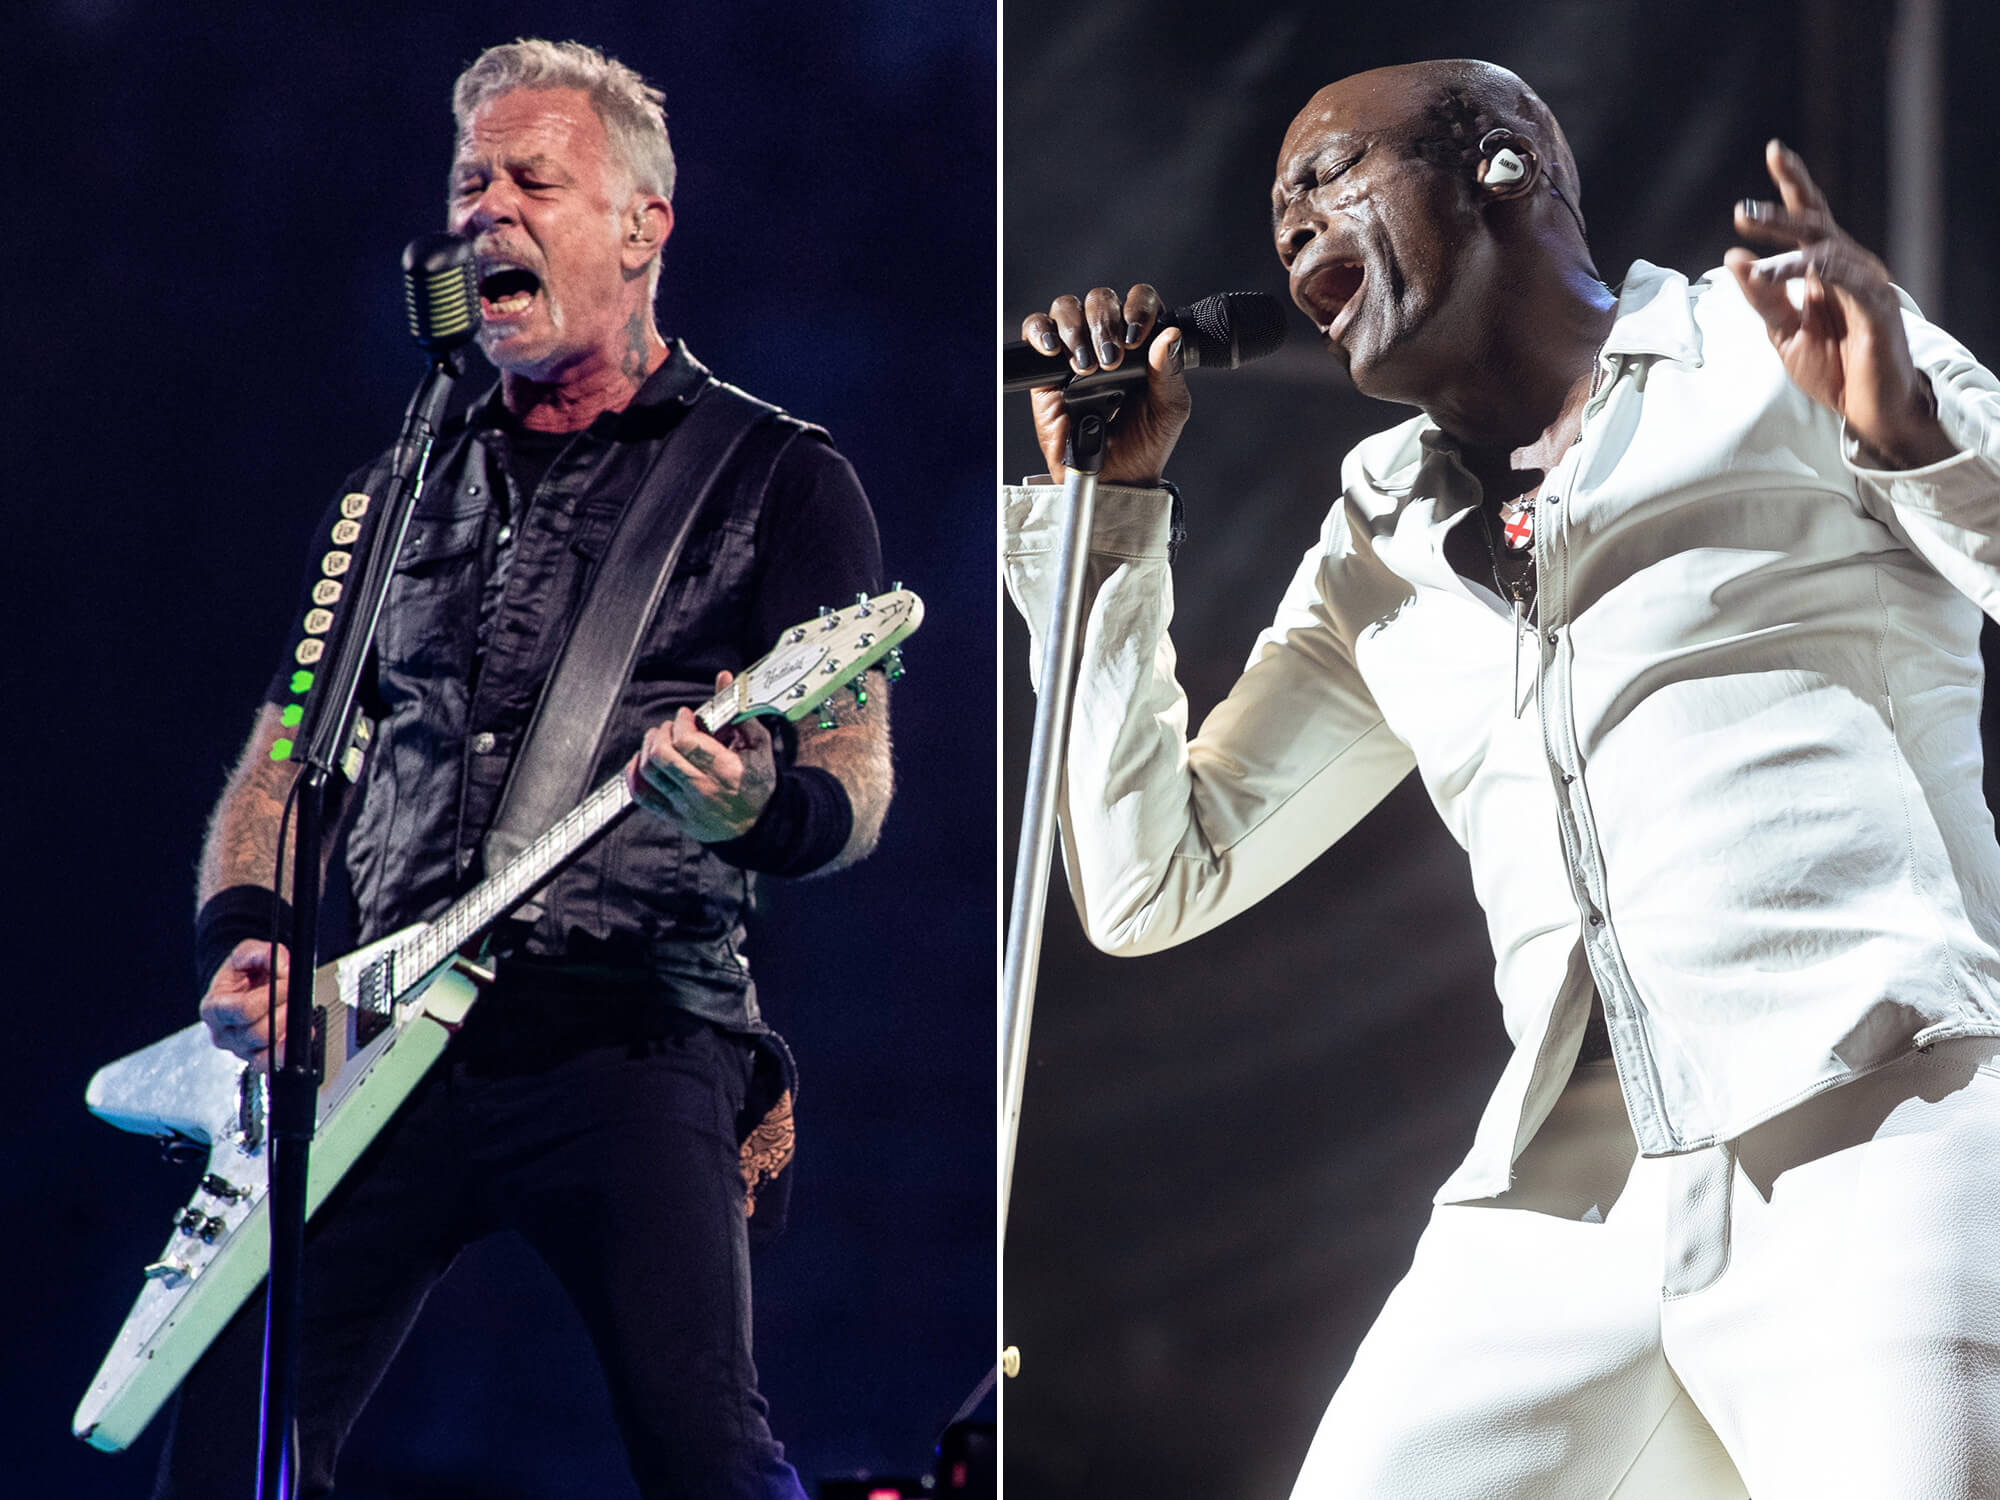 [L-R] James Hetfield and Seal